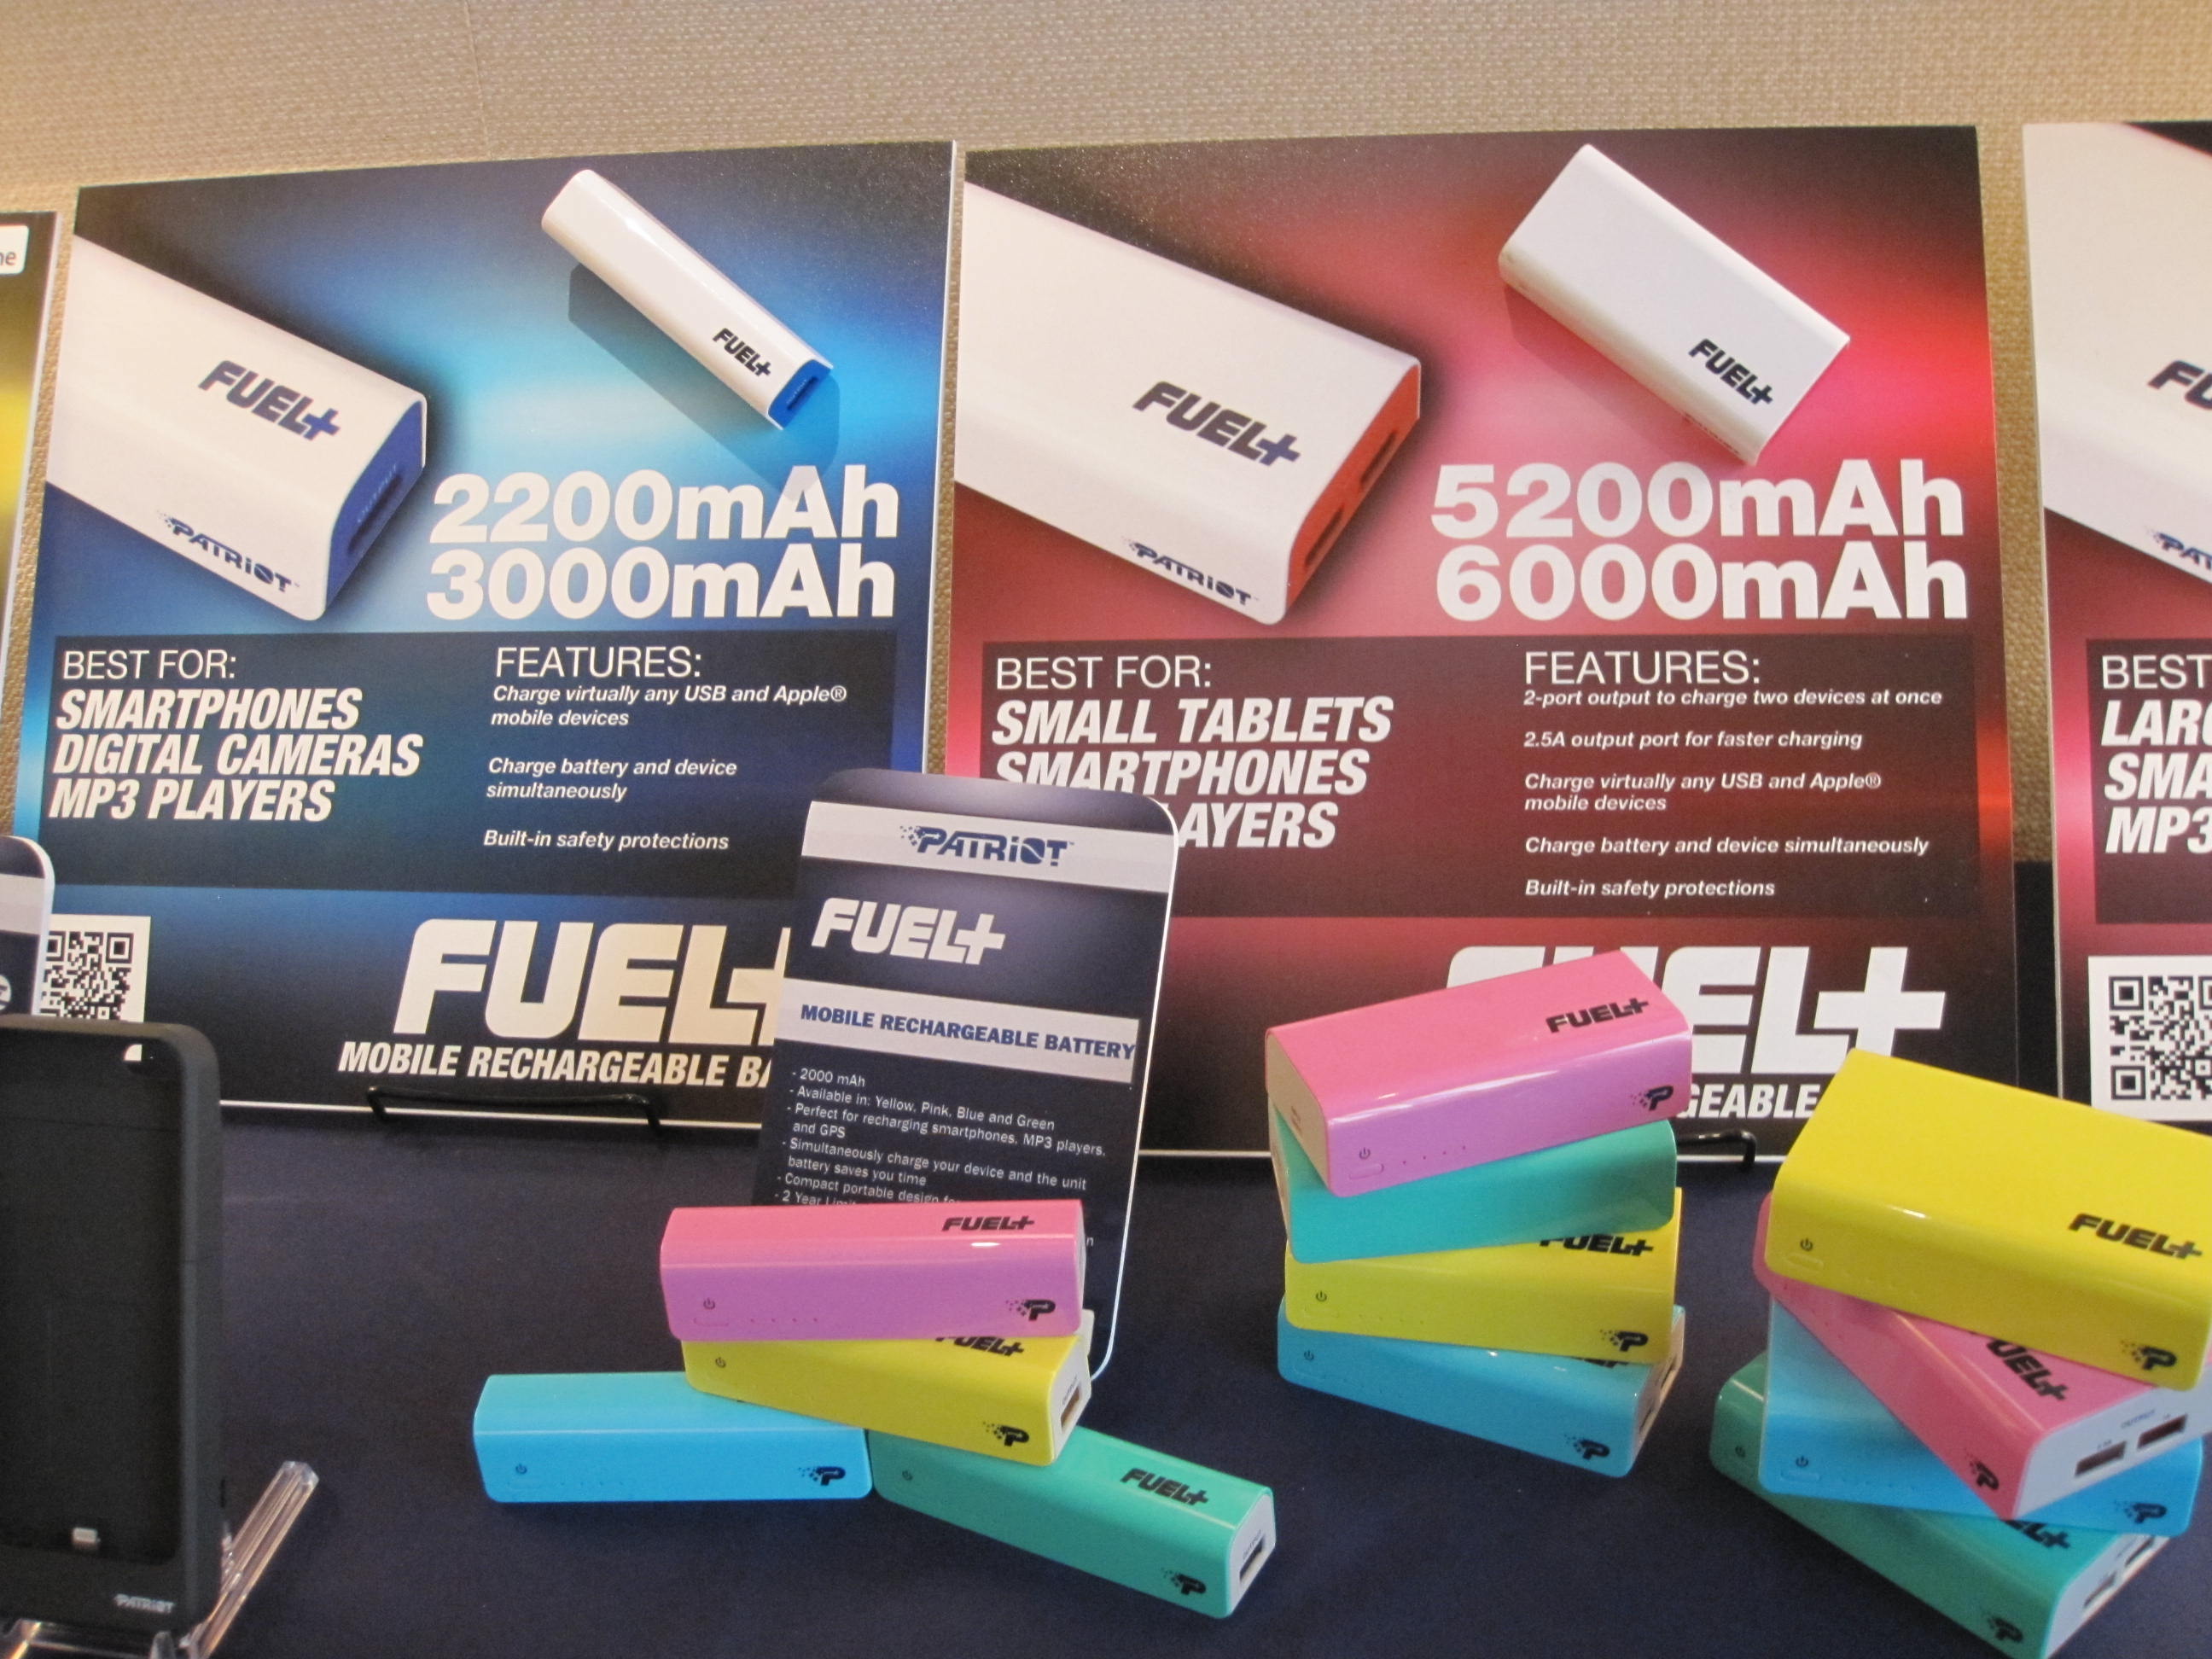 The Patriot Memory FUEL+ Mobile Rechargeable Battery